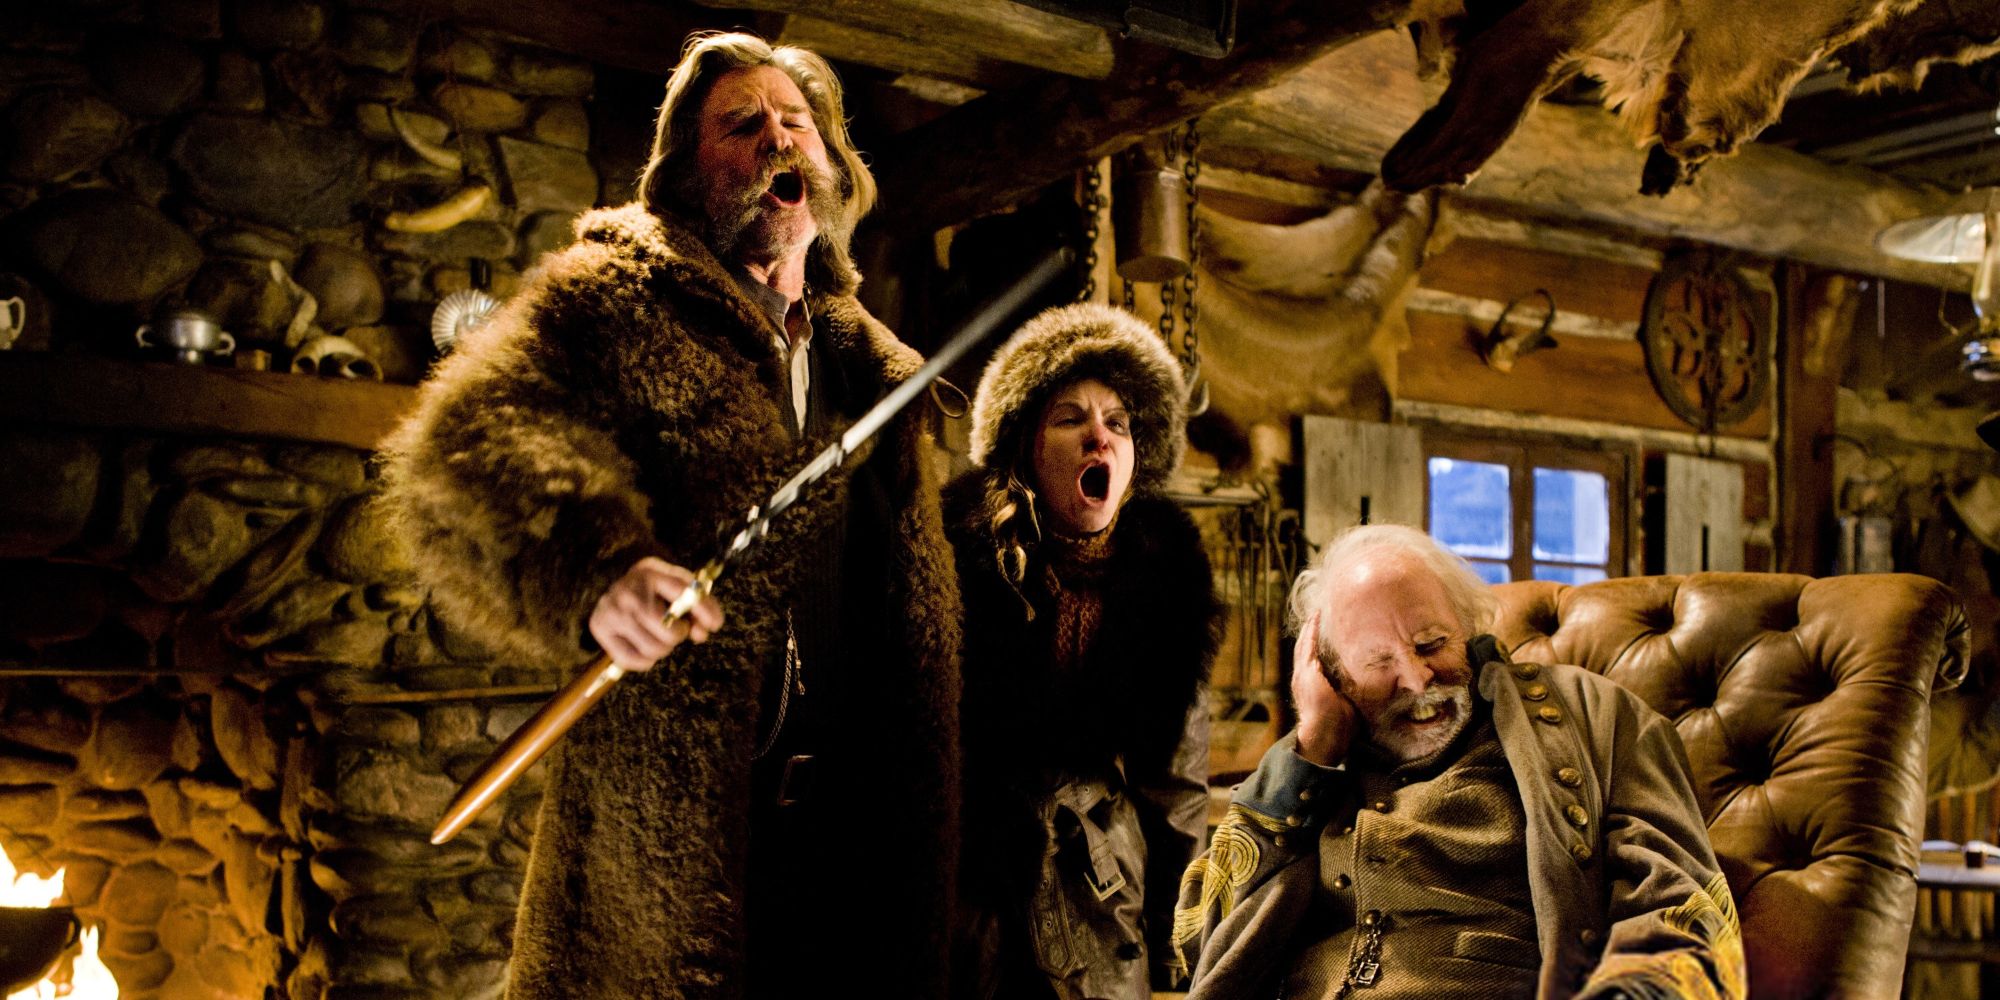 Kurt Russell as John Ruth holding a rifle next to Jennifer Jason Leigh as Daisy Domergue. Both are vocalizing loudly near Bruce Dern as Sheriff Randy Smithers in The Hateful Eight